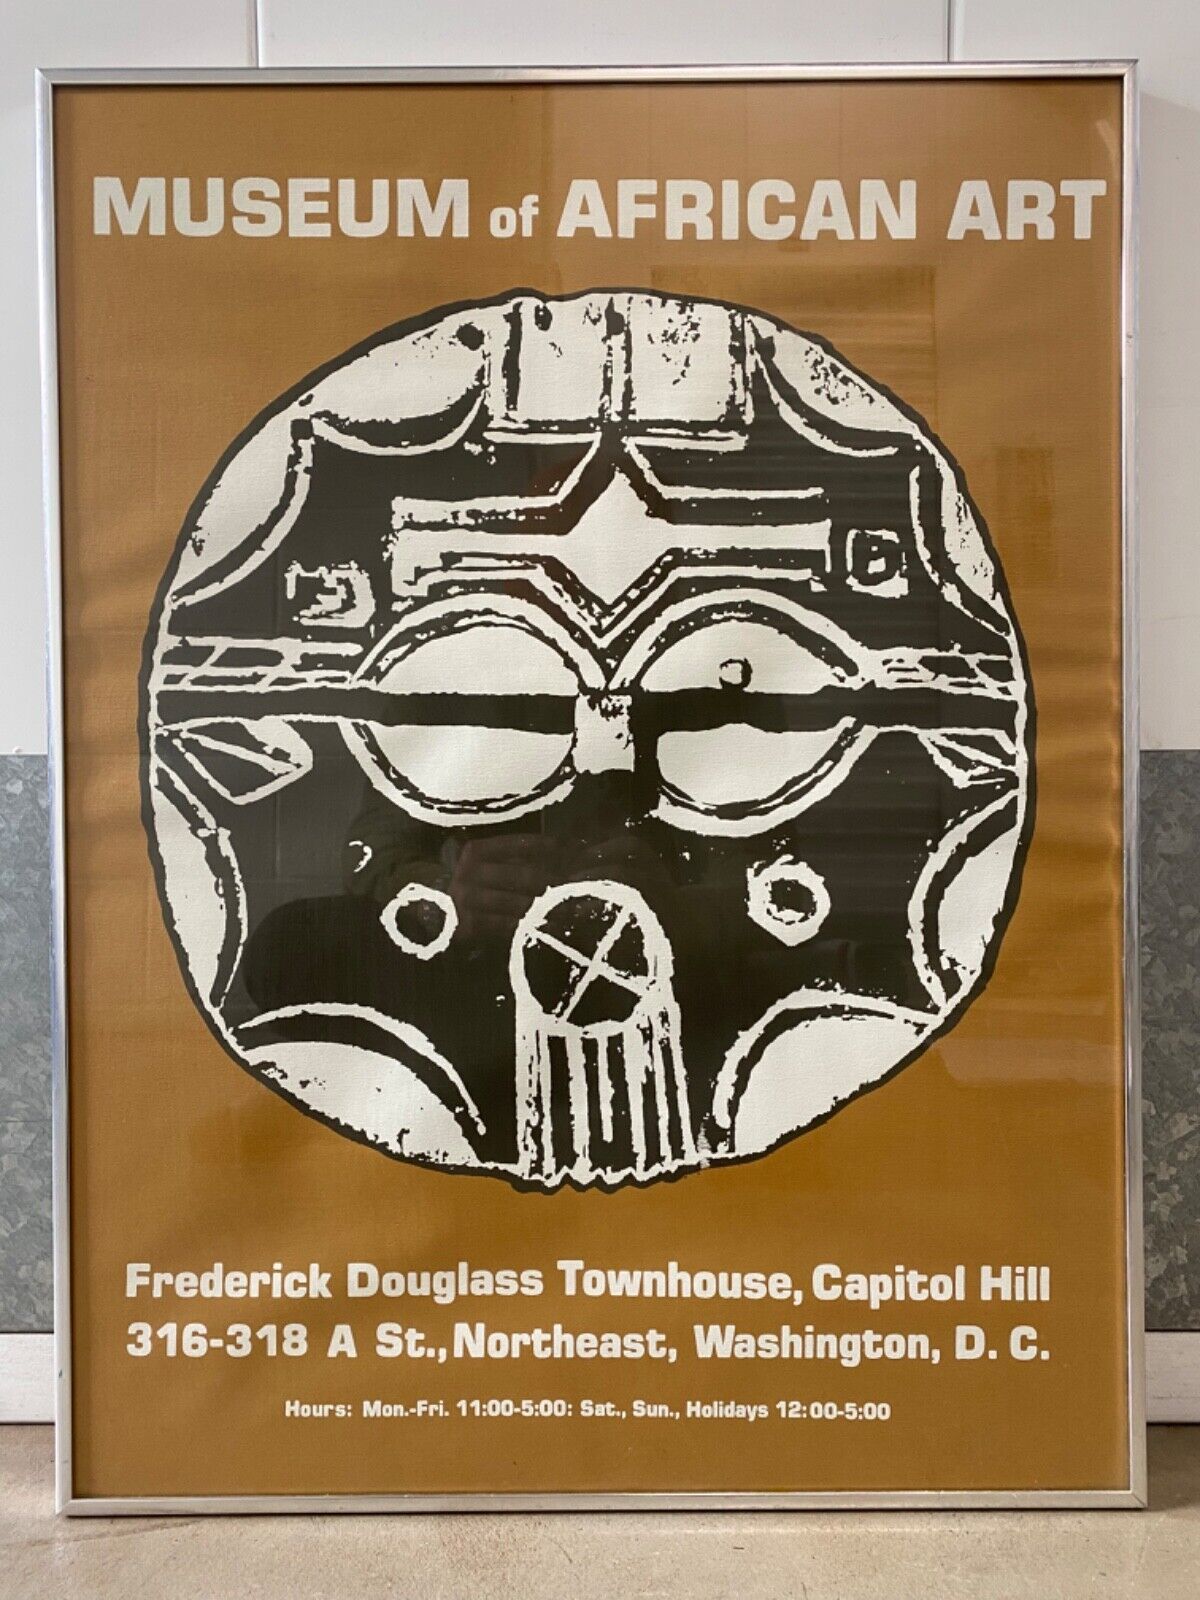 🔥 RARE Vintage Tribal African Art Ethnographic Museum Exhibition Poster 1960s